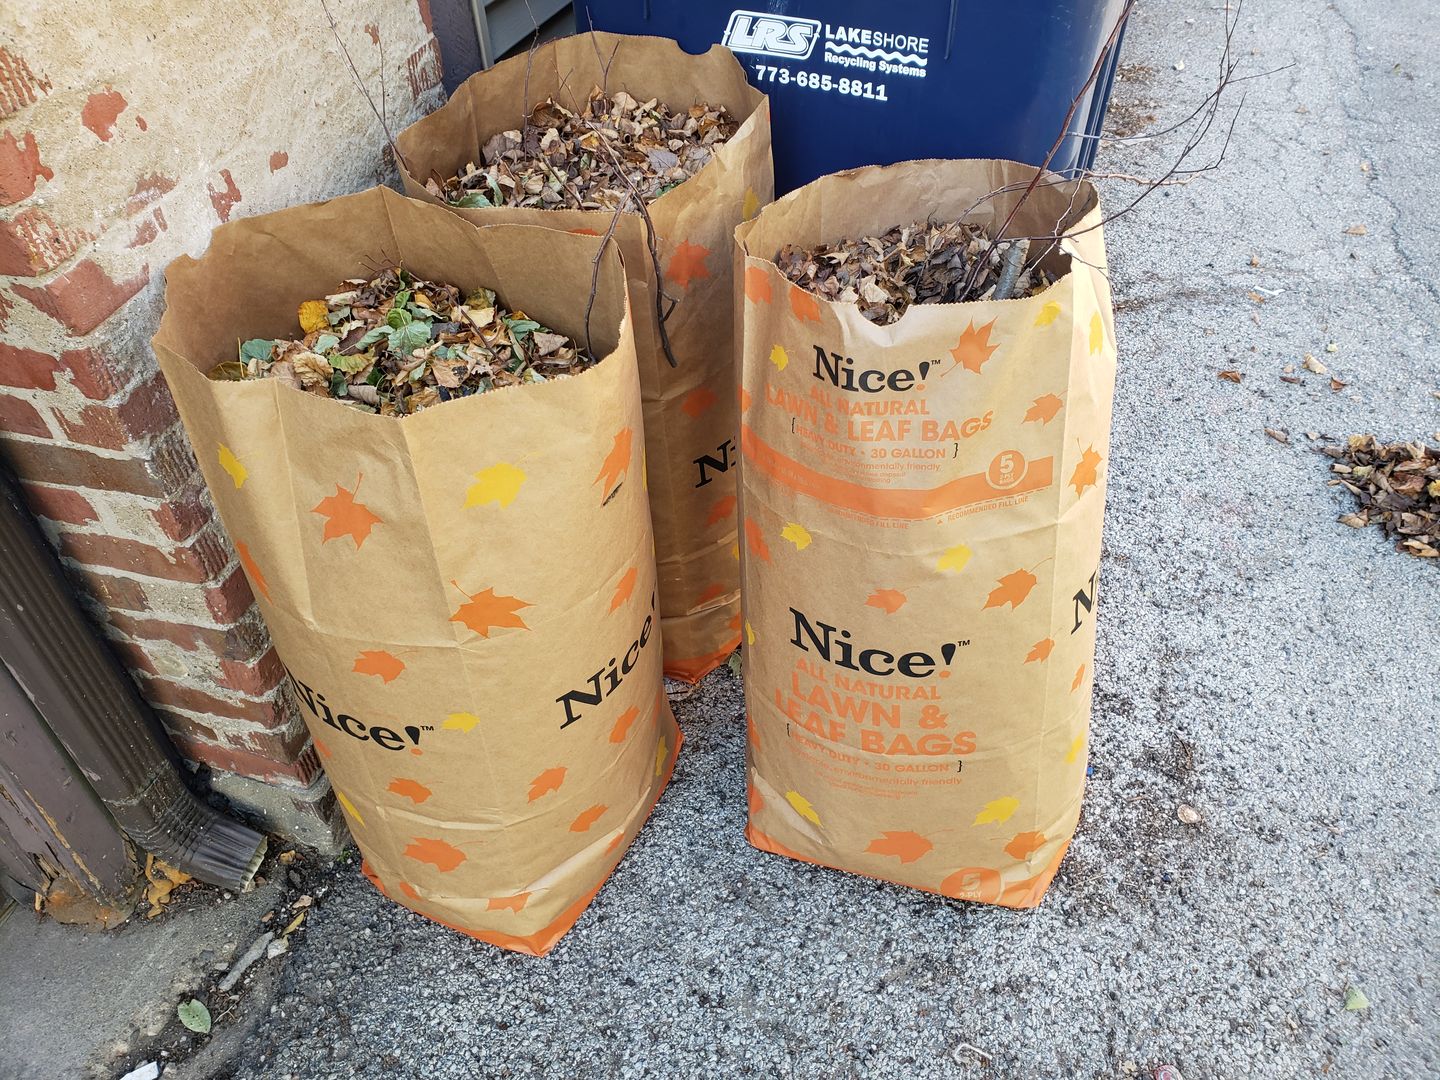 Chicago looks to improve its yard waste composting - Axios Chicago